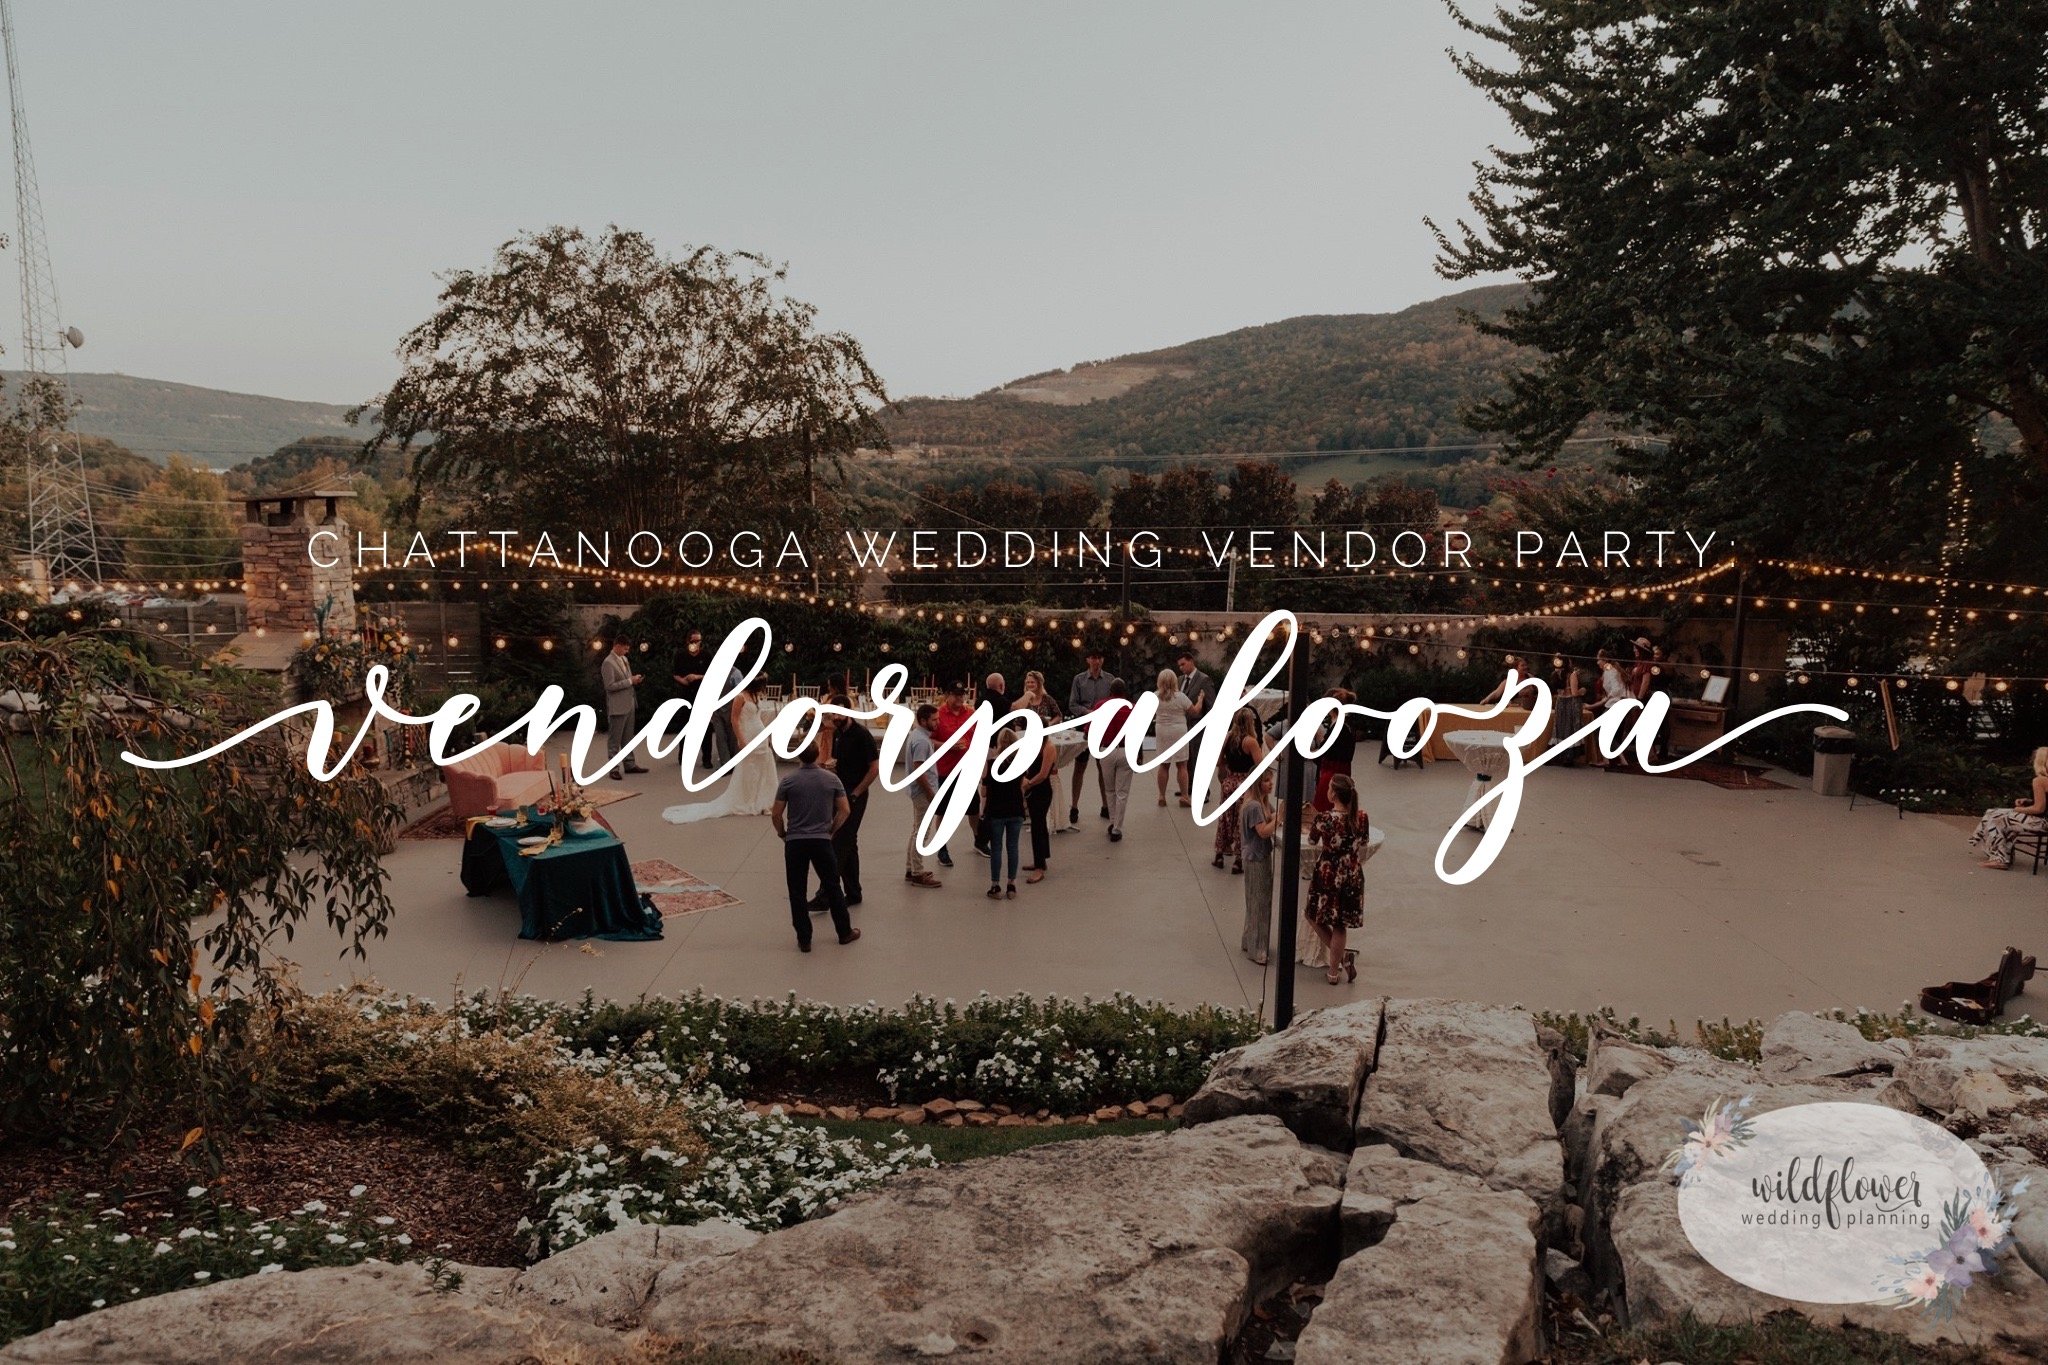 Cover photo for Chattanooga Vendor Party "VendorPalooza"